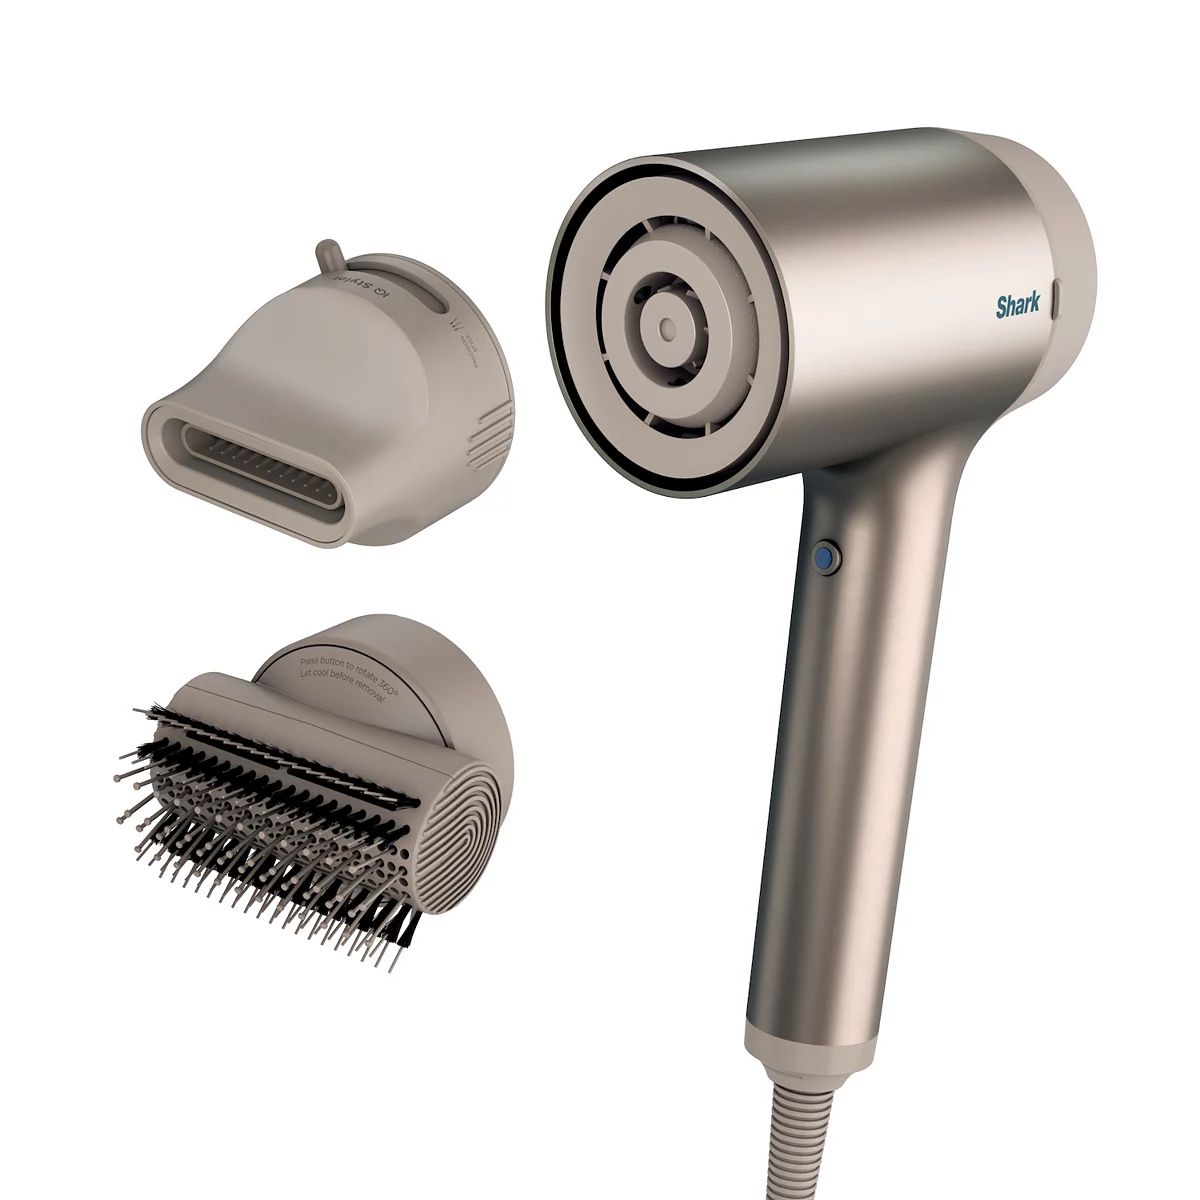 Shark HyperAIR Ionic Hair Dryer with IQ 2-in-1 Concentrator & Styling Brush Attachments | Kohl's